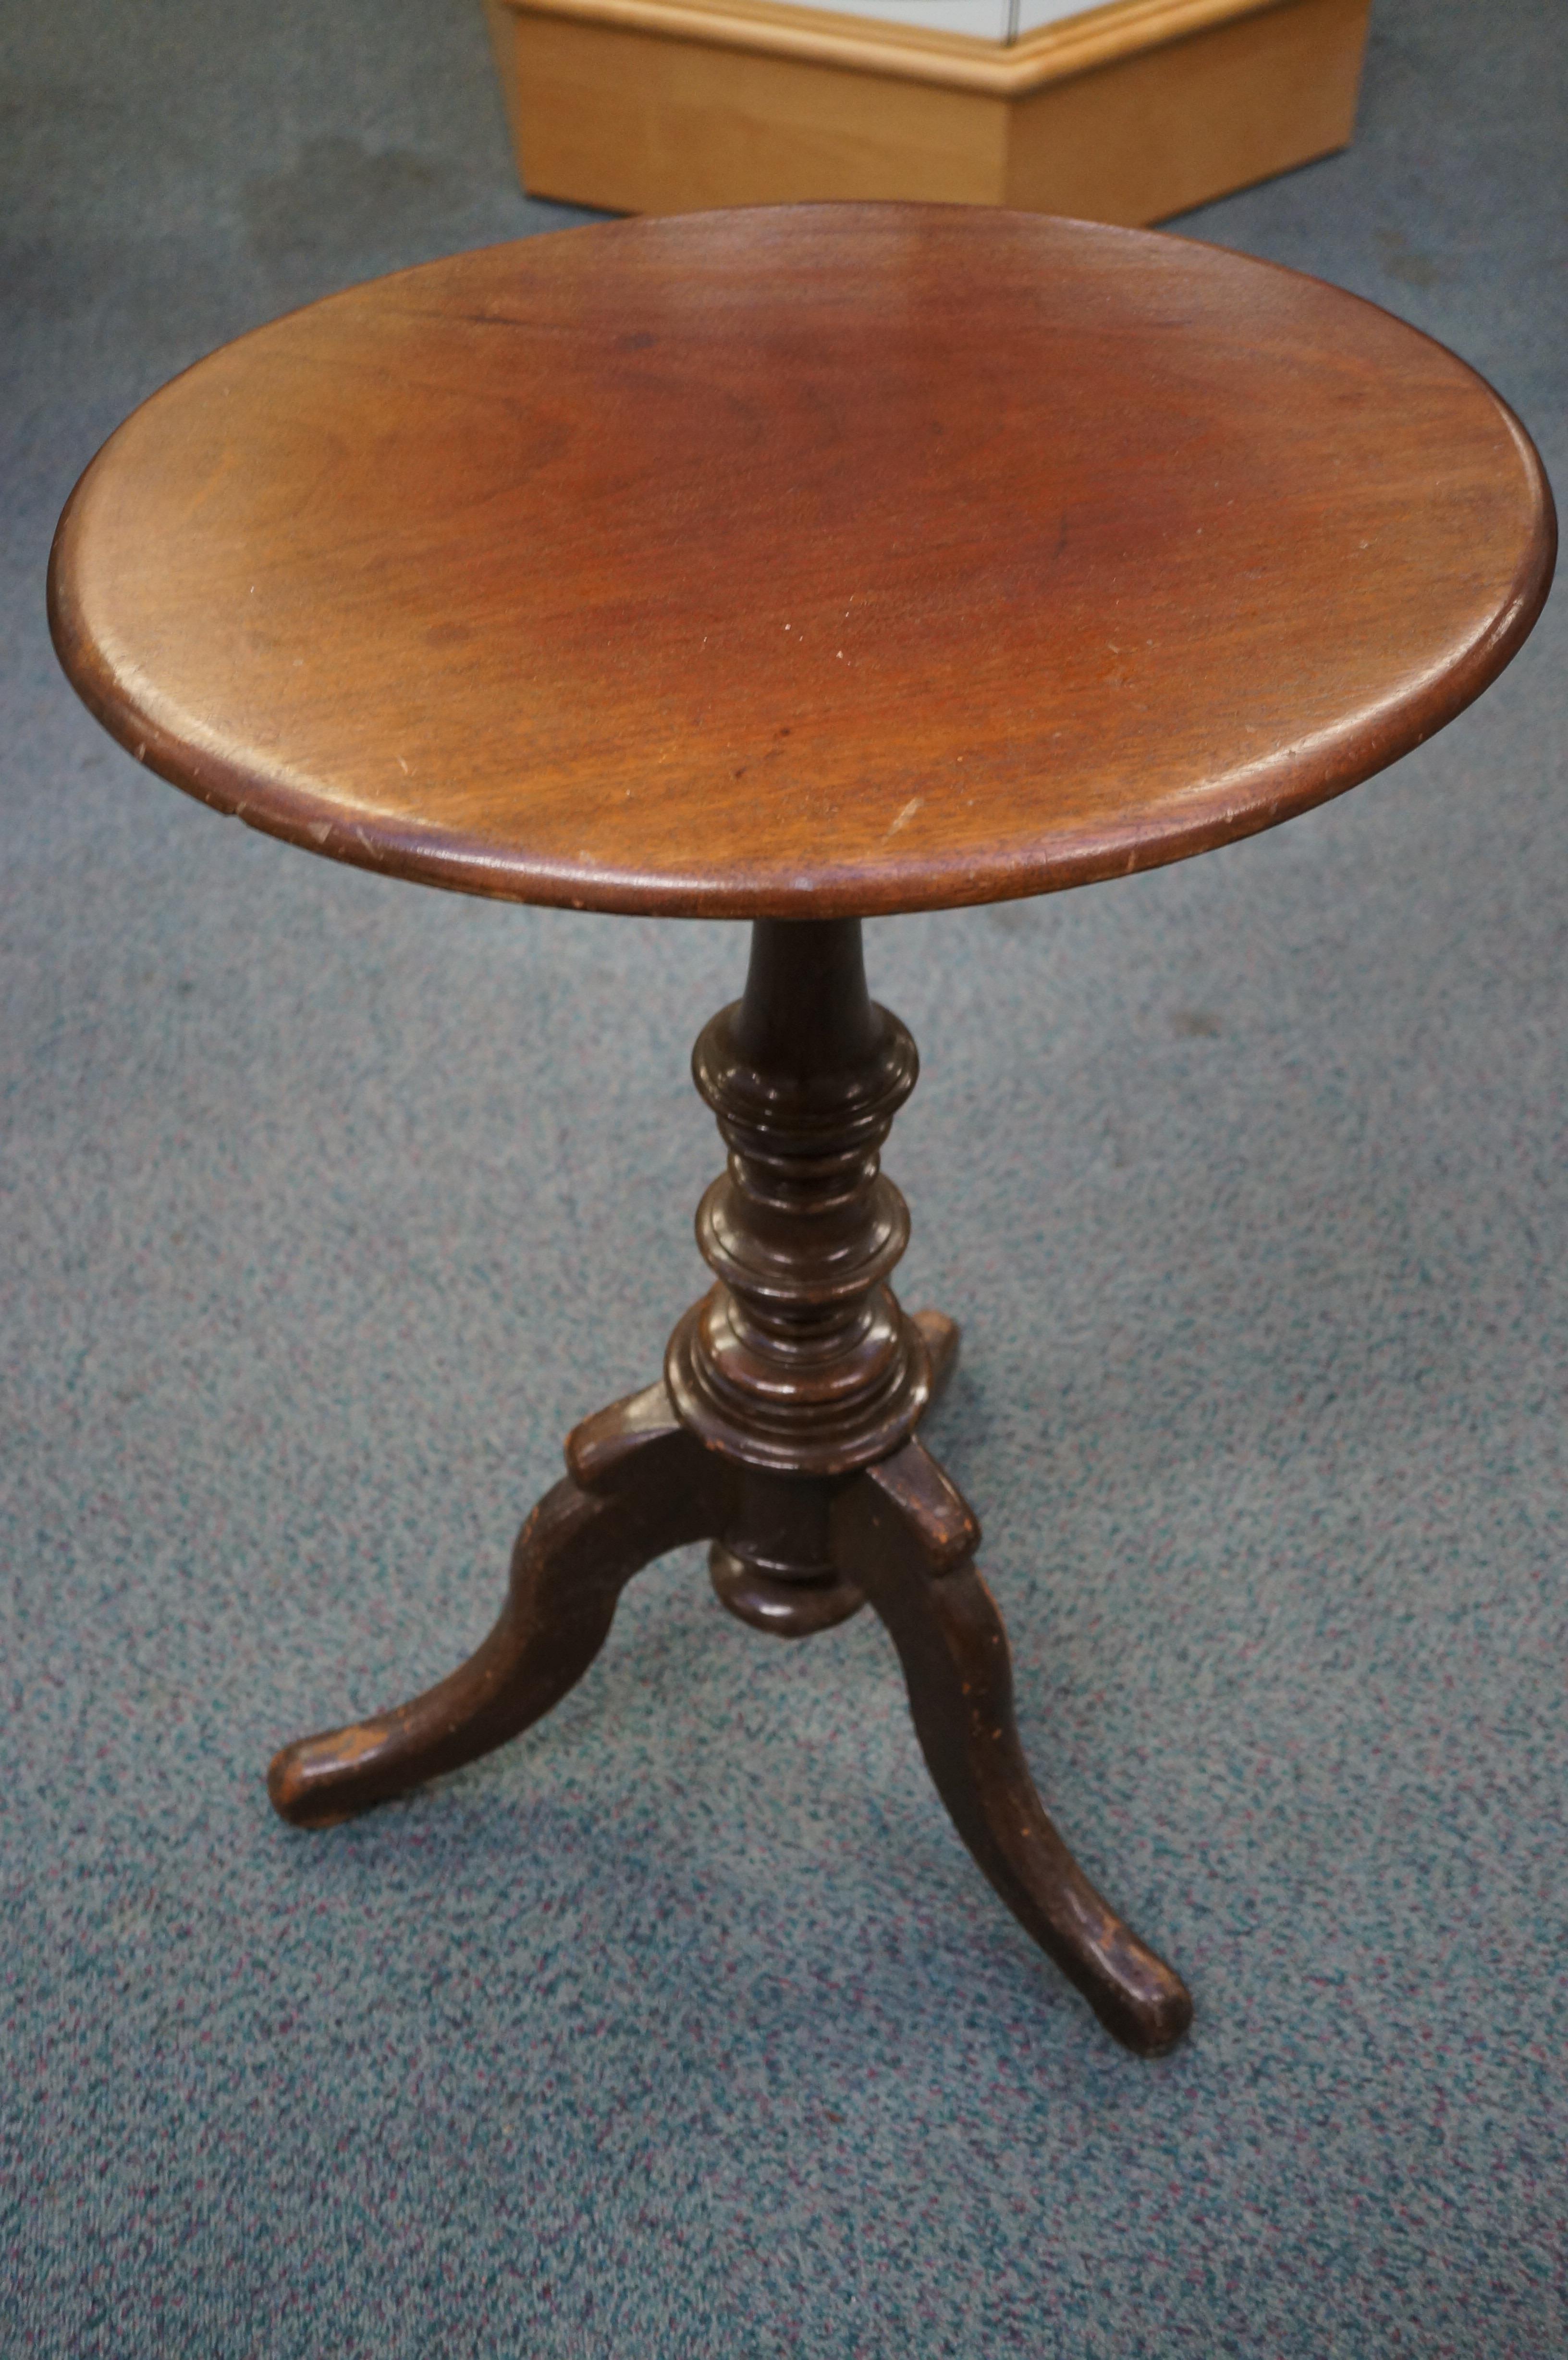 Early 20th century wine table